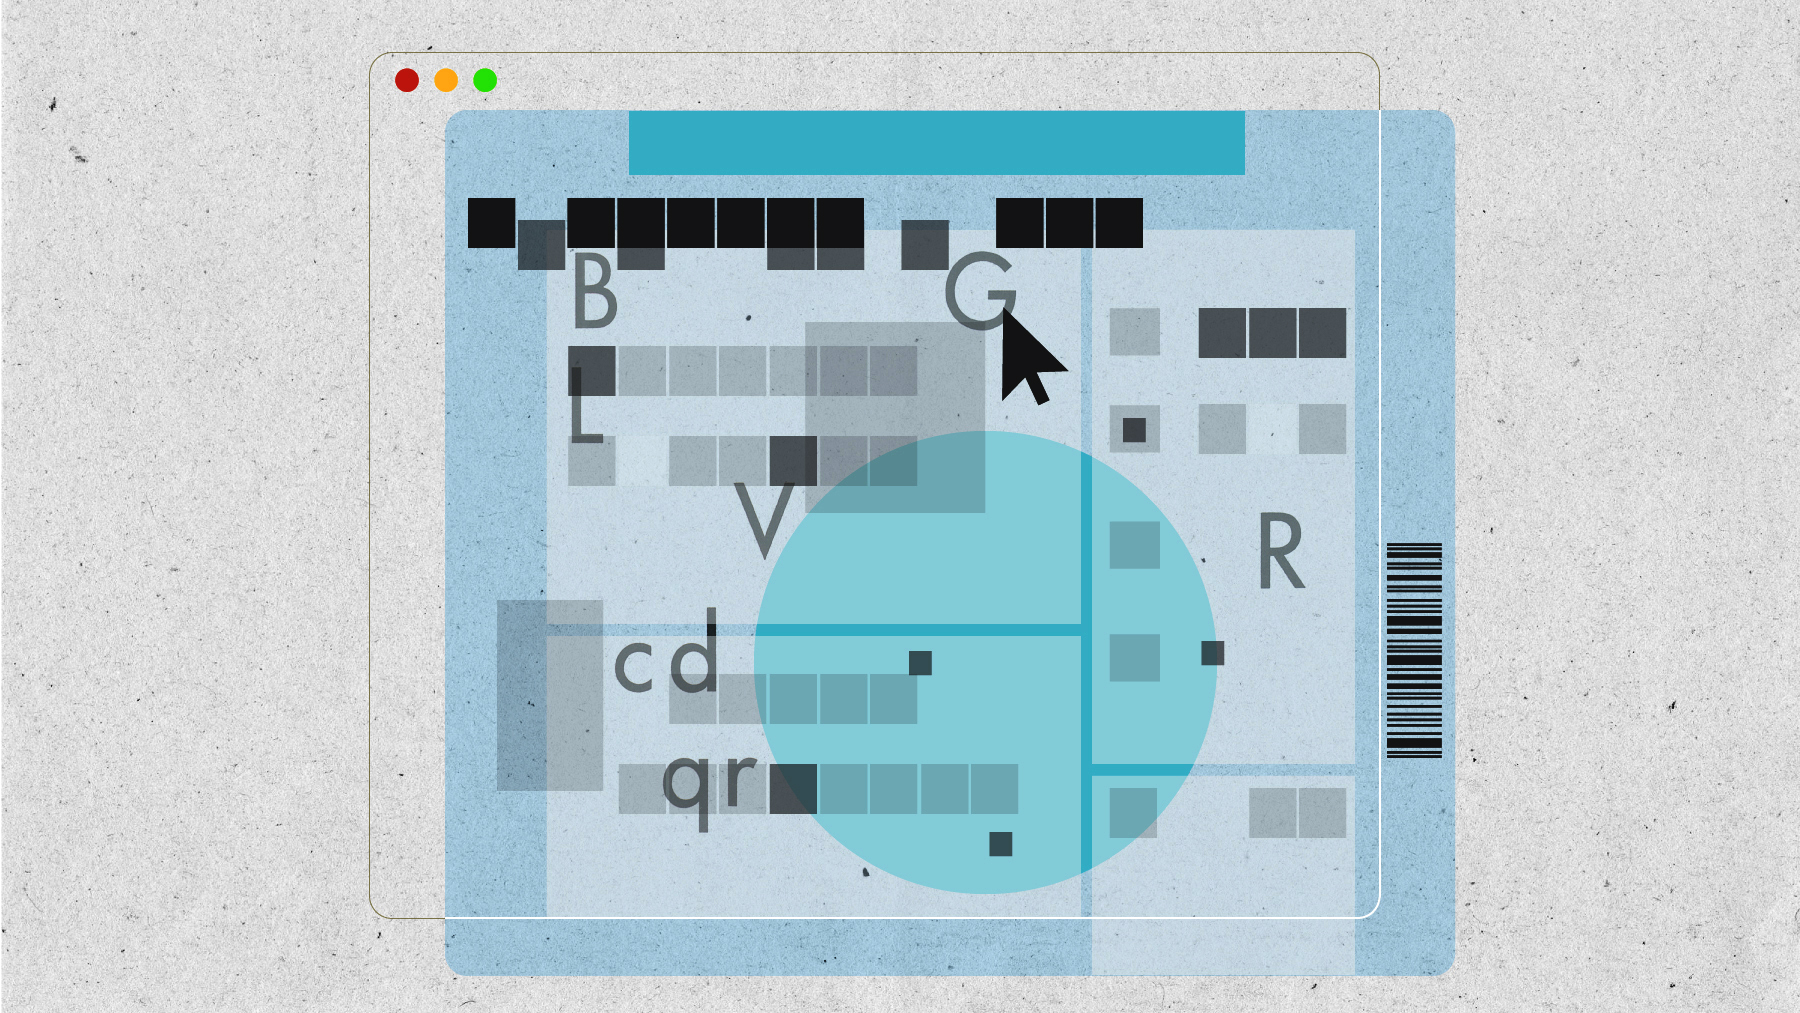 An illustration using rounded and transitional squares and circle elements that look like a census form in an internet browser.